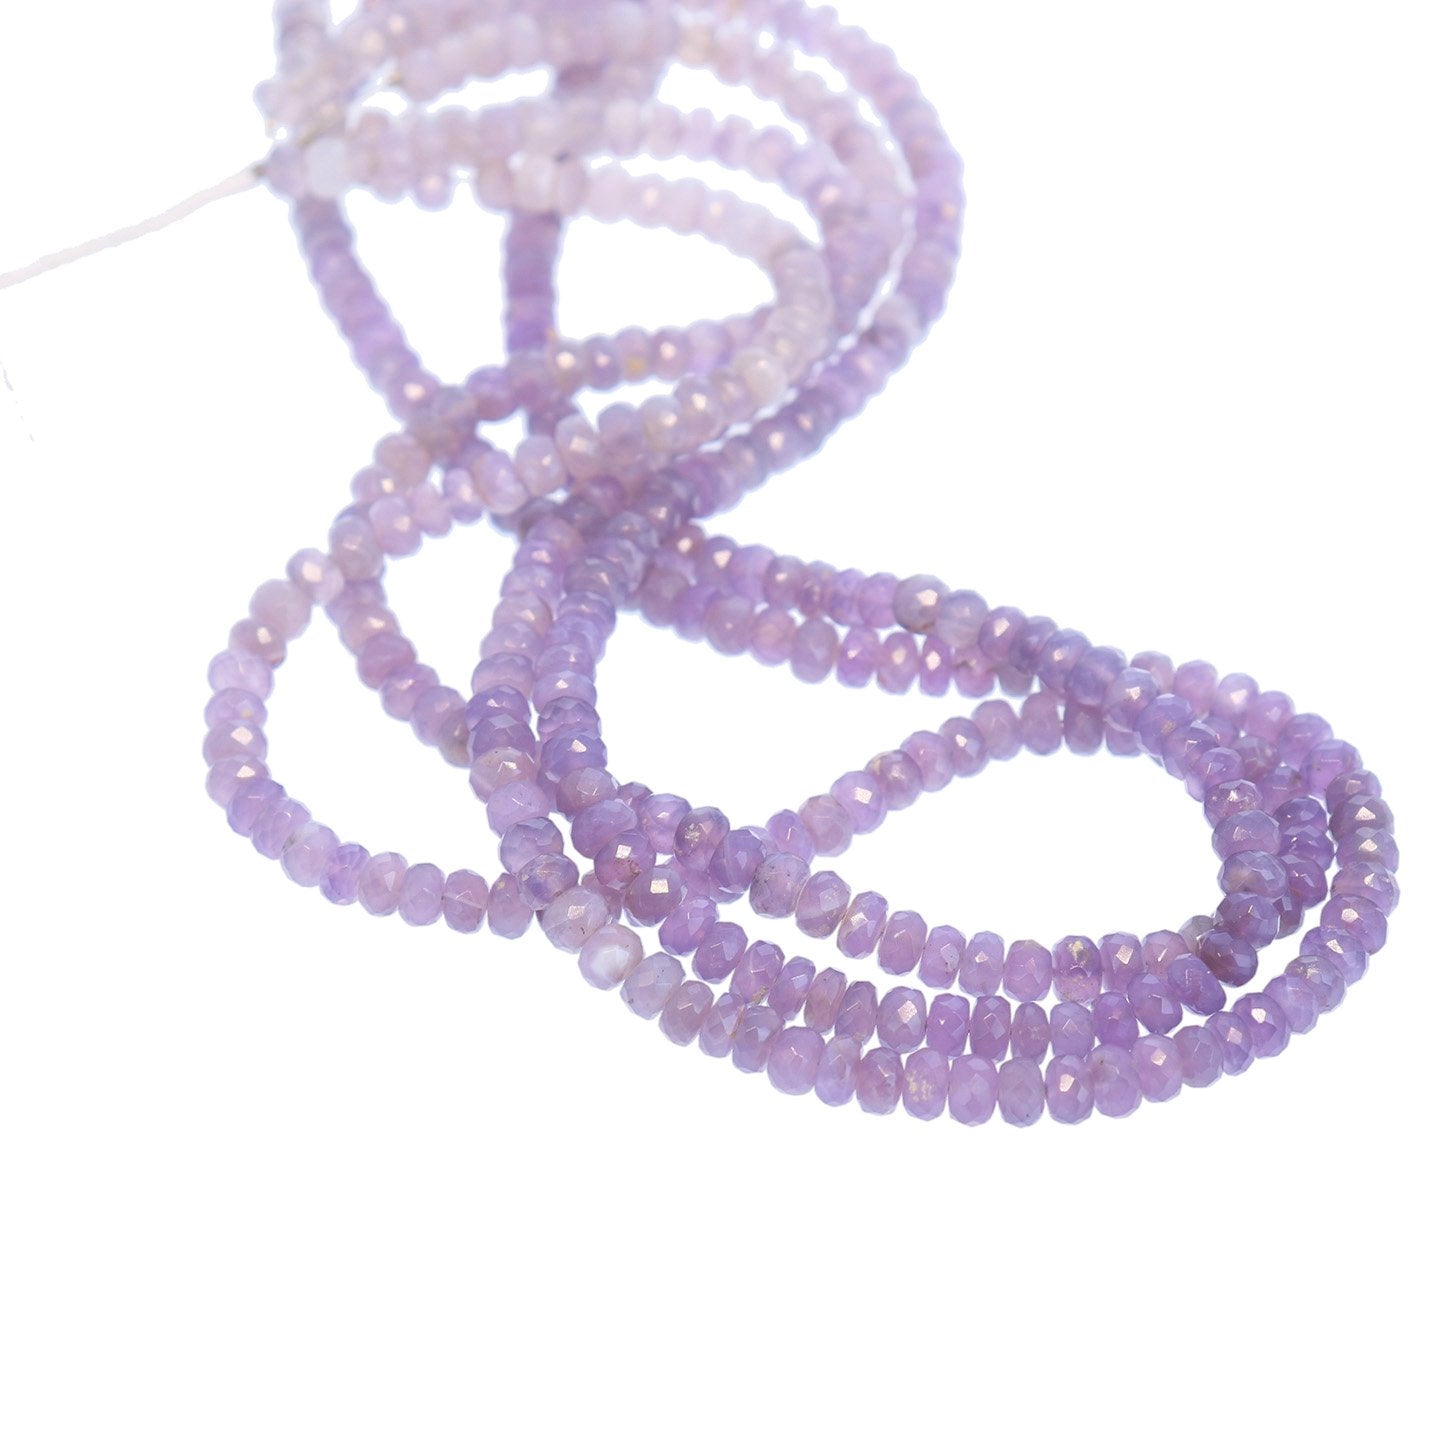 New* Indonesian Purple Chalcedony Beads Faceted 6mm -NewWorldGems